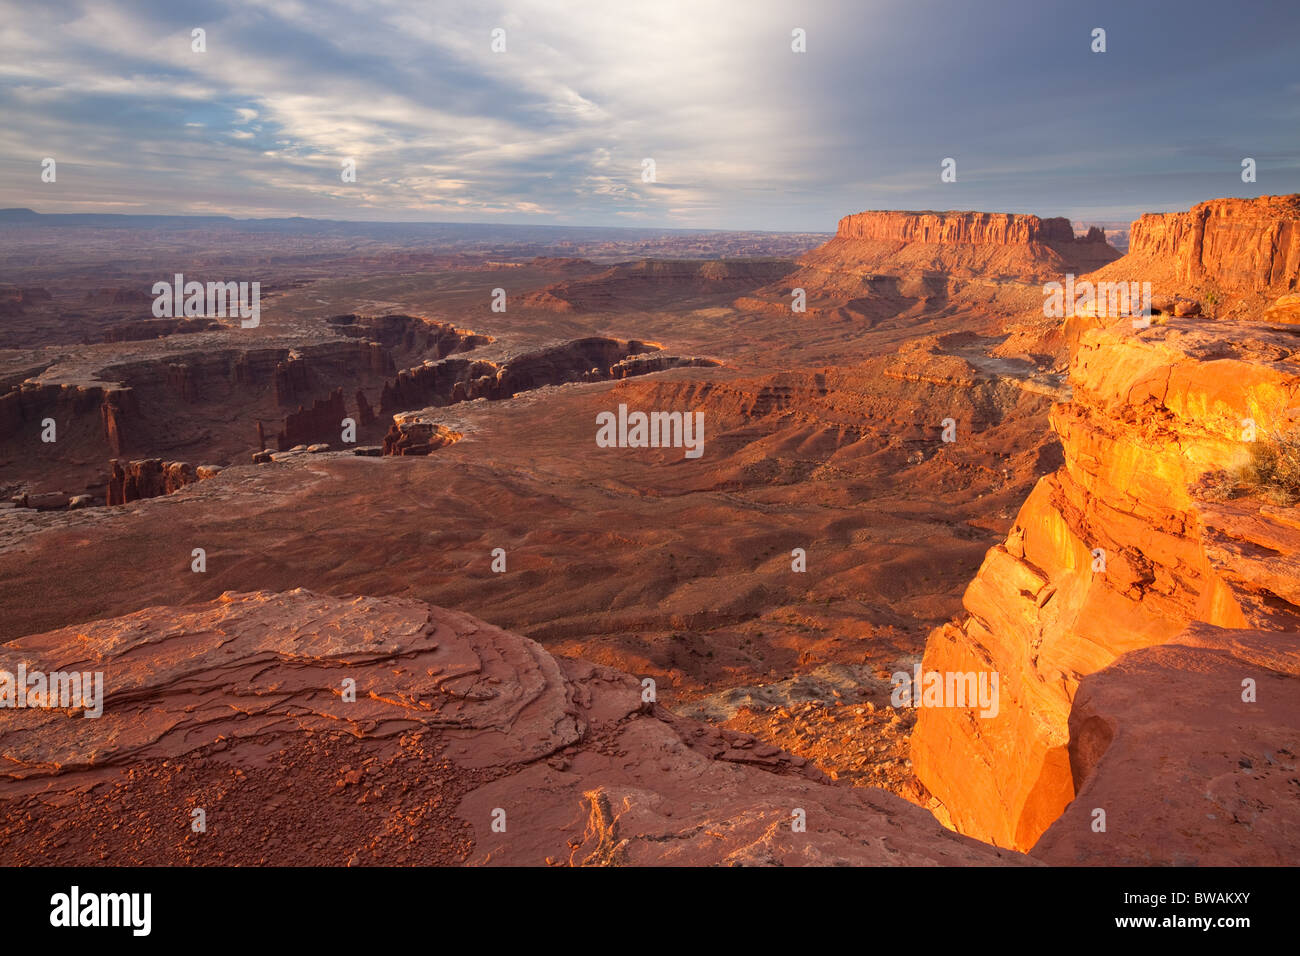 Canyonlands from White Rim Overlook, Island in the Sky unit, Canyonlands National Park, Utah Stock Photo